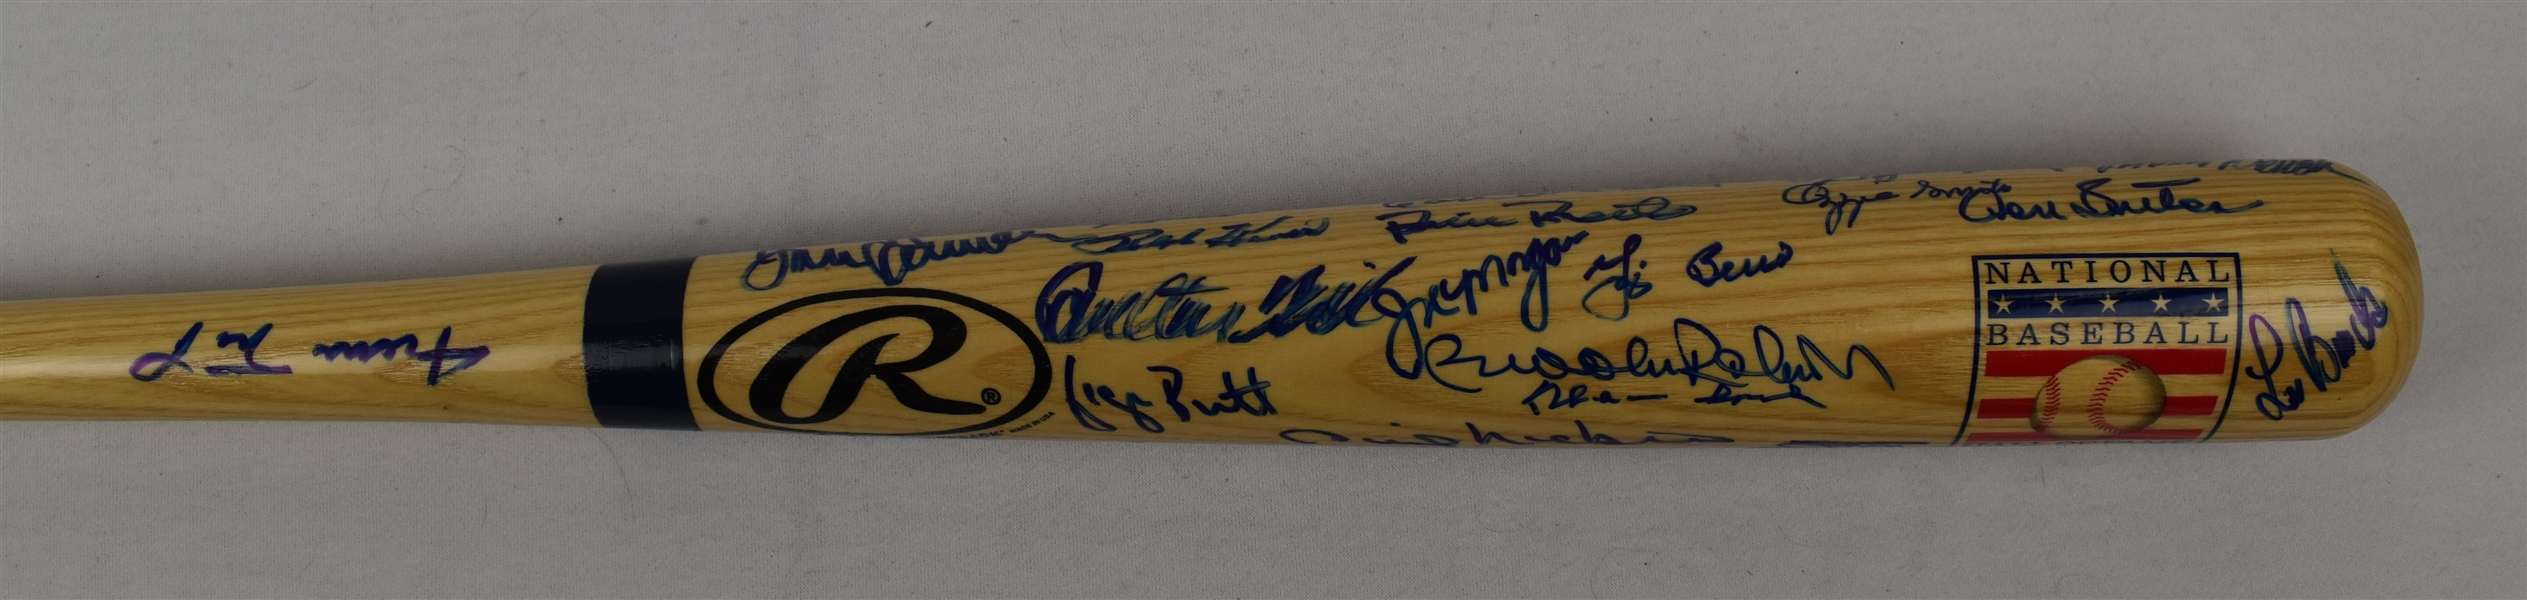 Hall of Fame Autographed Baseball Bat w/  39 Signatures Including Kirby Puckett & Willie Mays w/Puckett Family Provenance